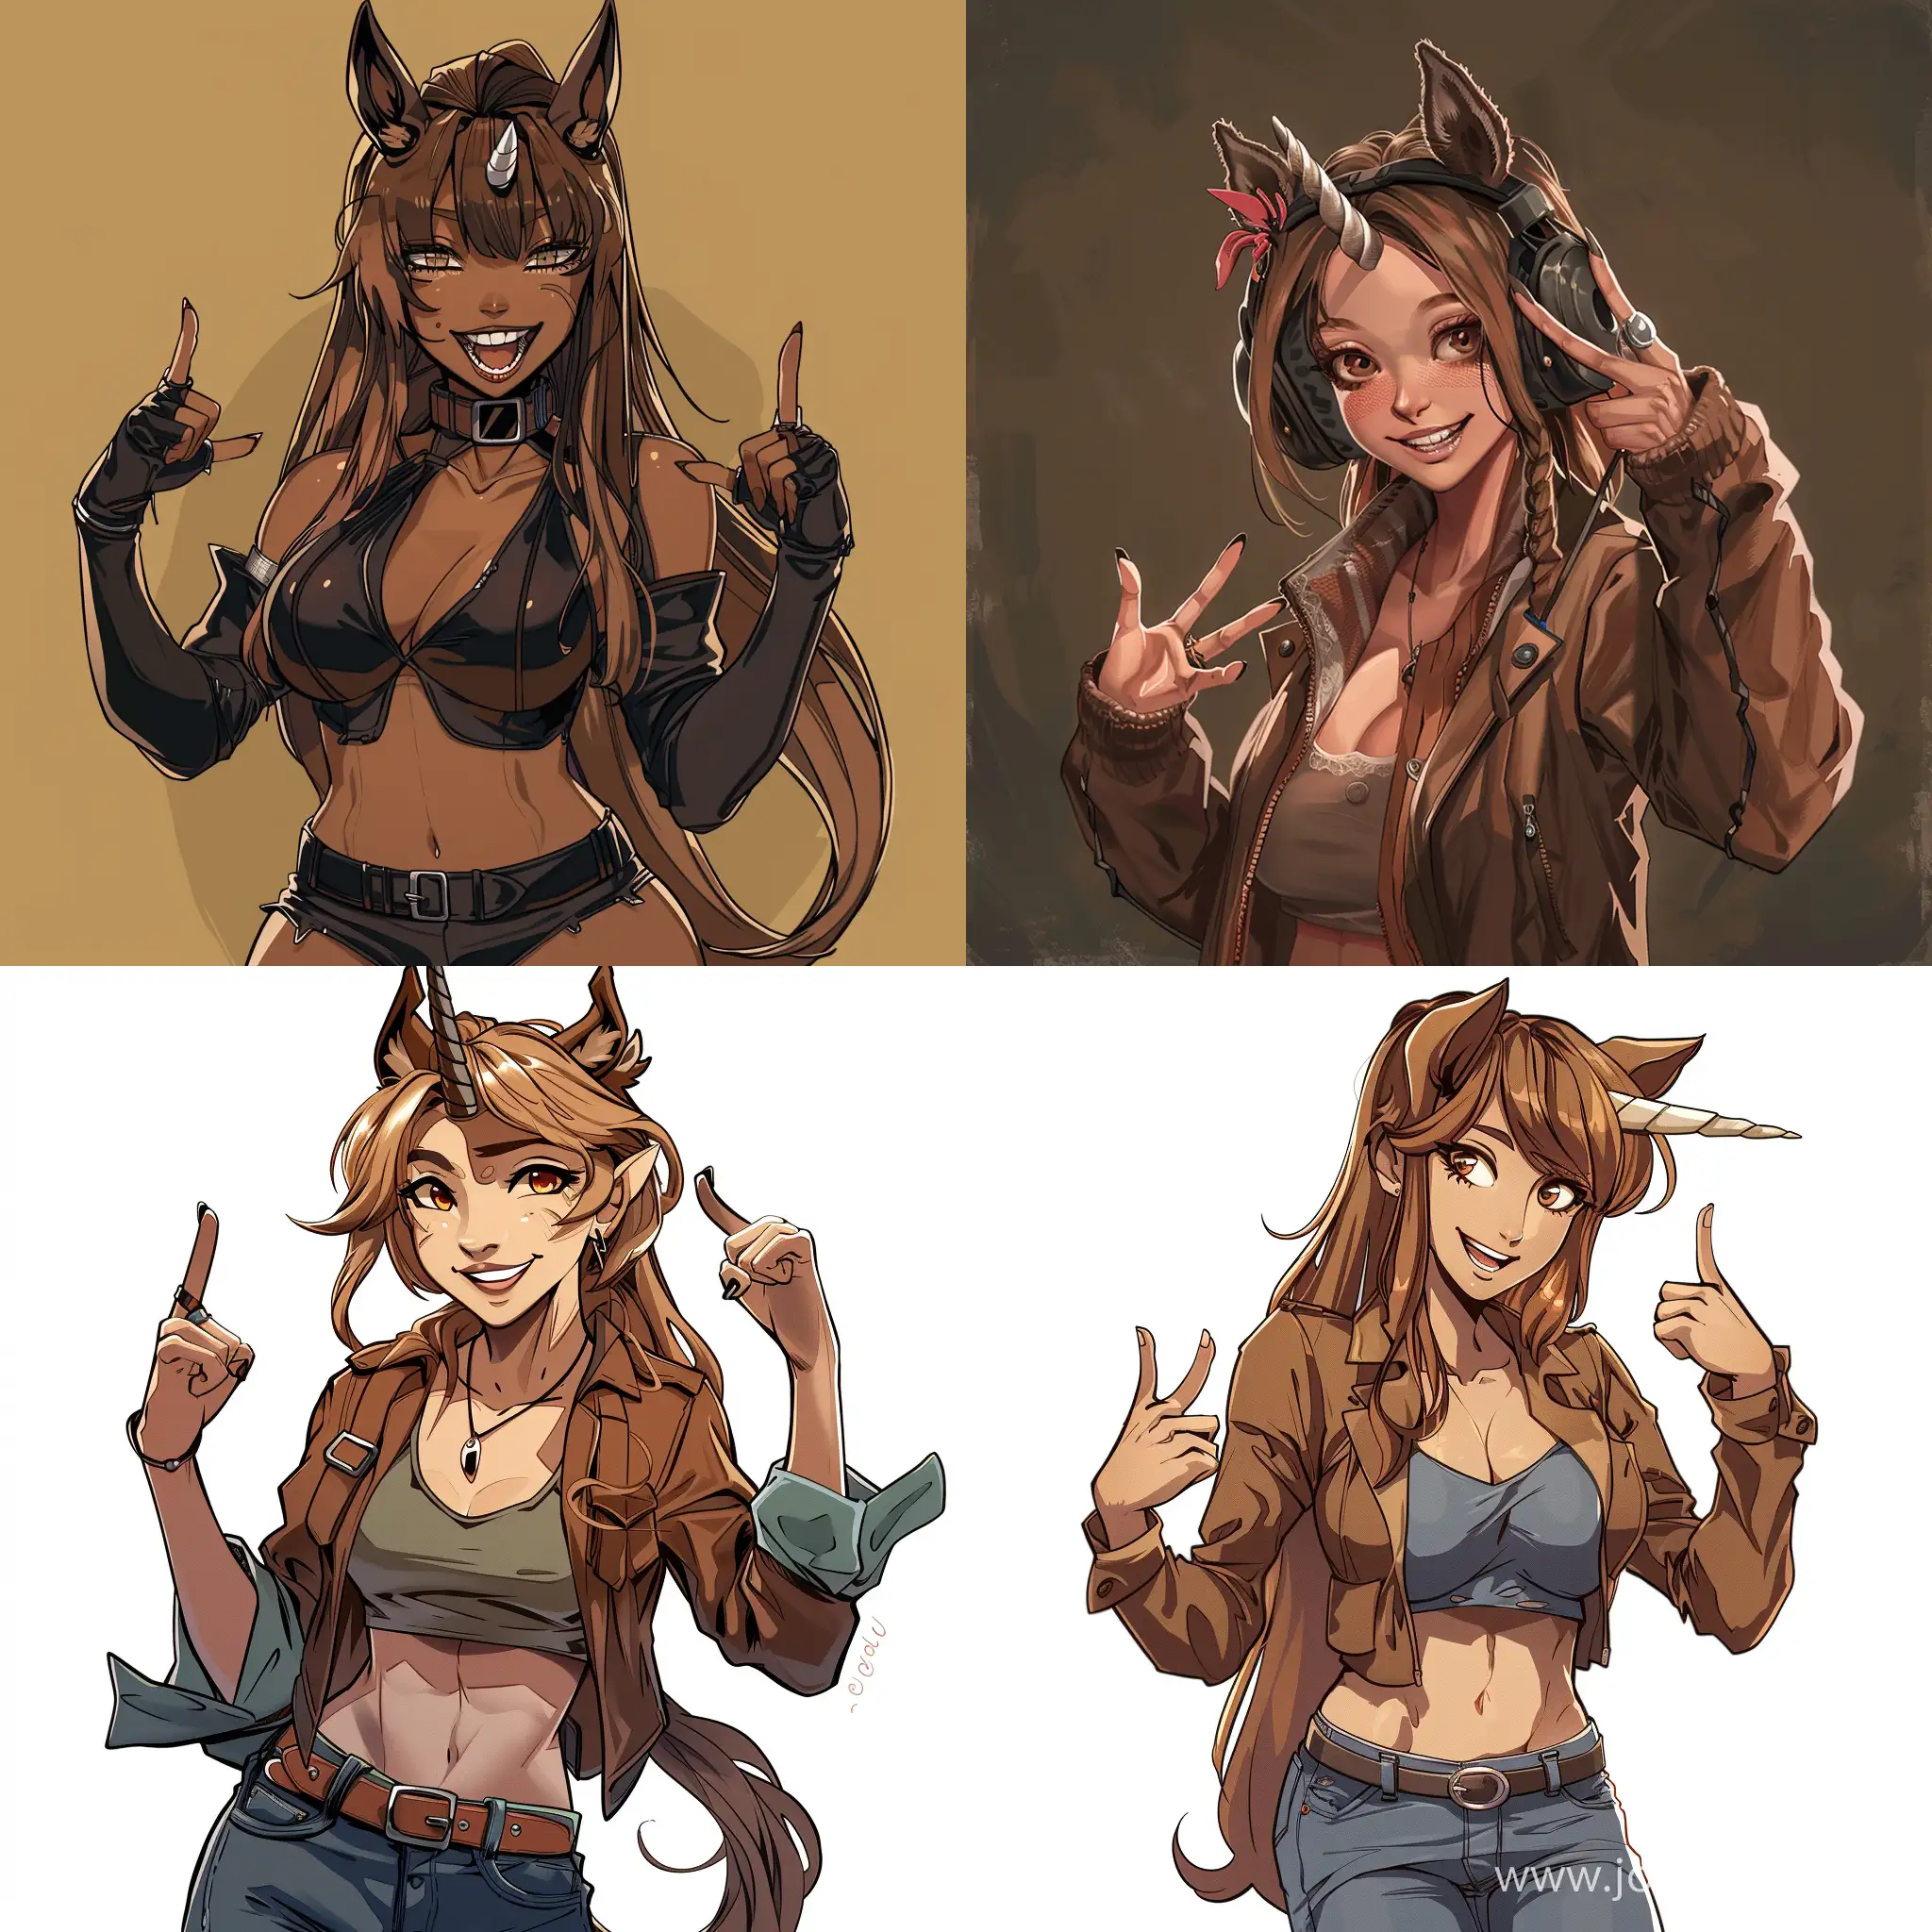 1 female, anthro ( horse head, animalistic, almost human, hooves, 3 fingers, horse tail), sexy, flirty, smiling, modern clothes, looking at camera 